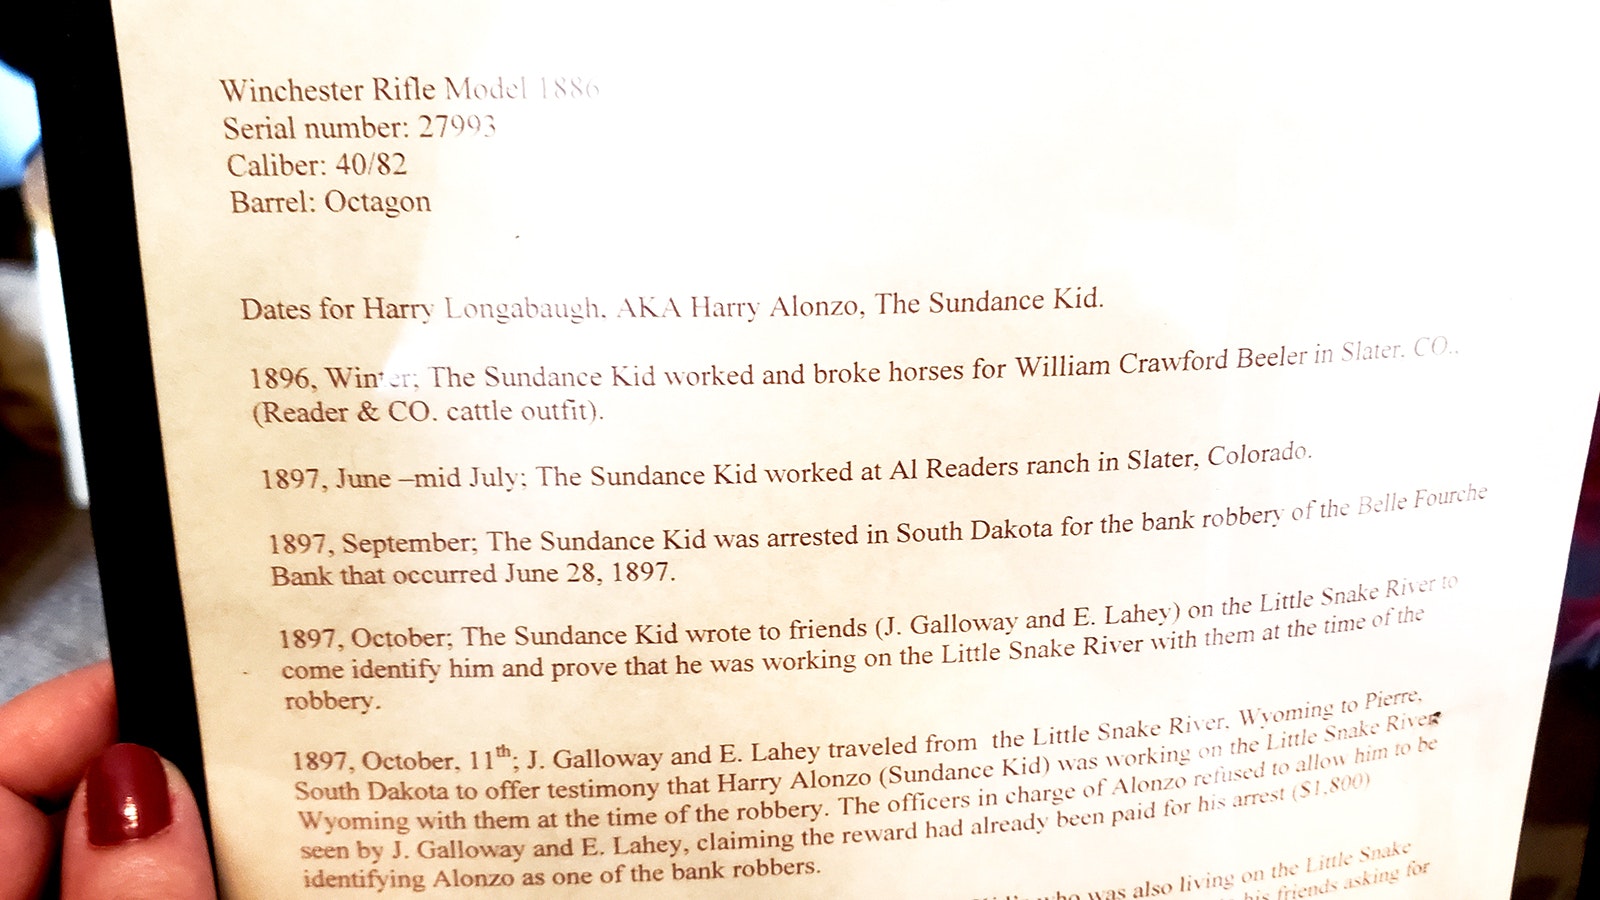 A timeline of events related to the whereabouts of Harry Longabaugh, aka the Sundance Kid, when the June 1897 bank robbery of a Belle Fourche South Dakota Bank took place.